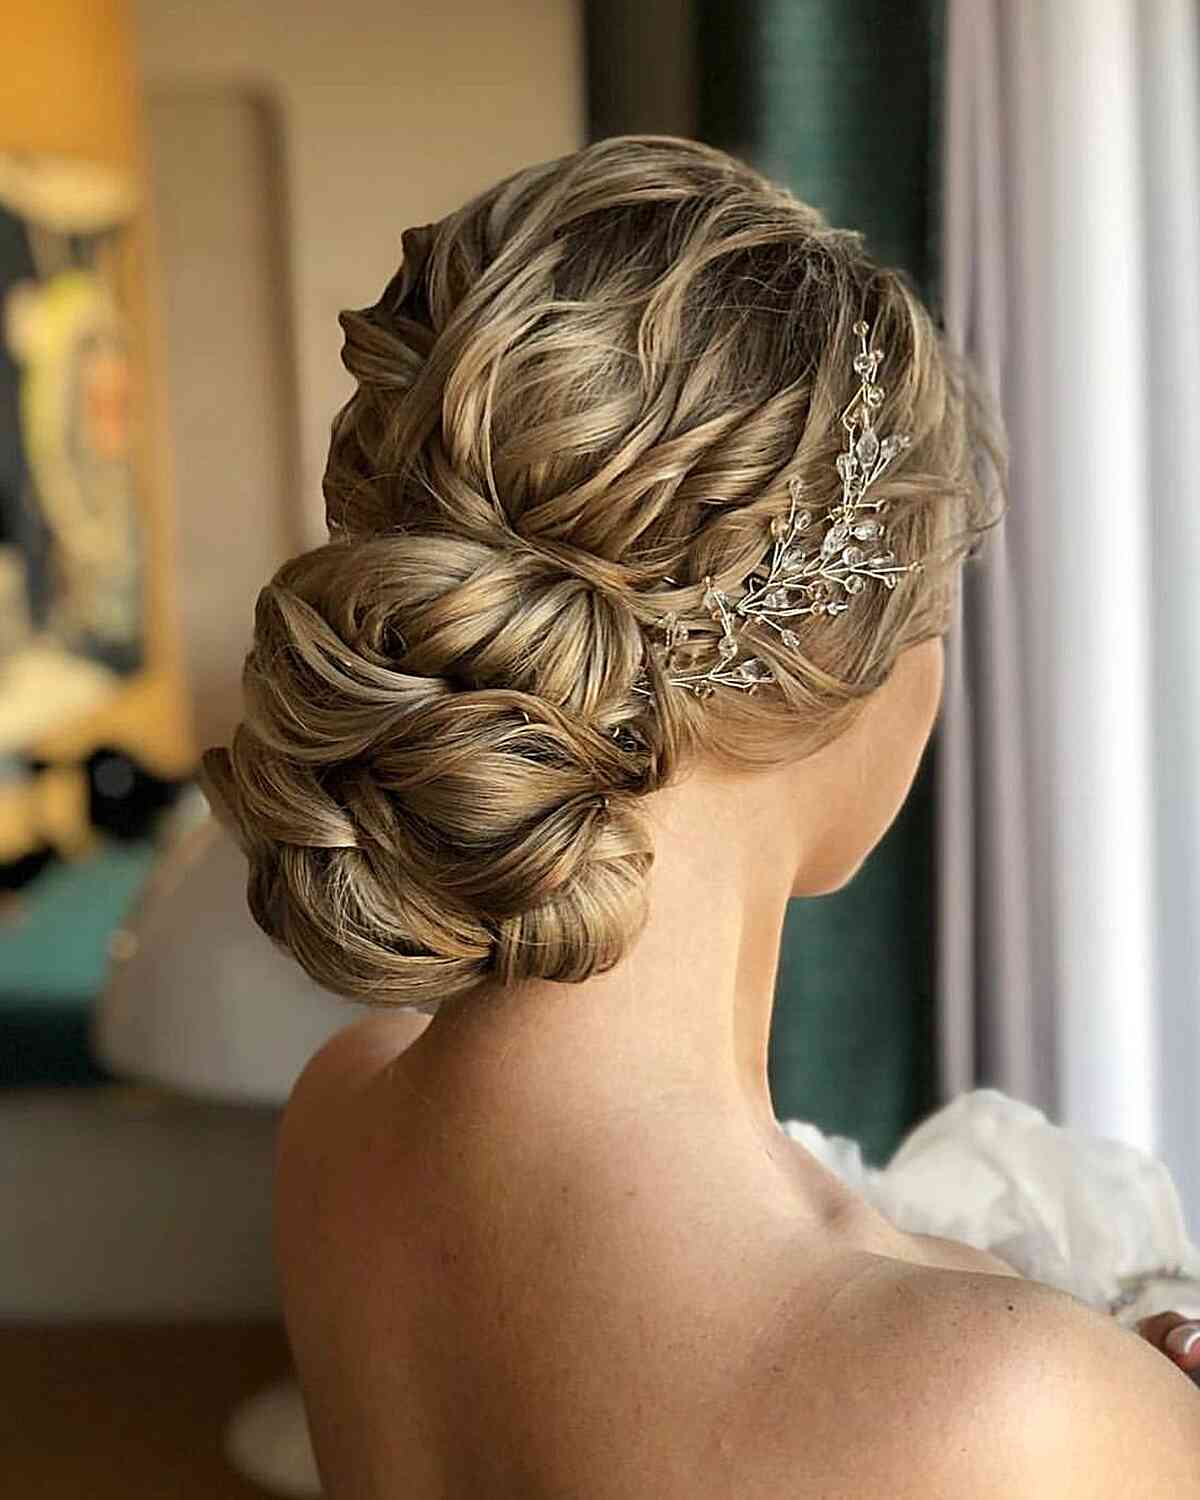 Long Easy Classic Low Bundle Updo Hairstyle for women with thick long hair